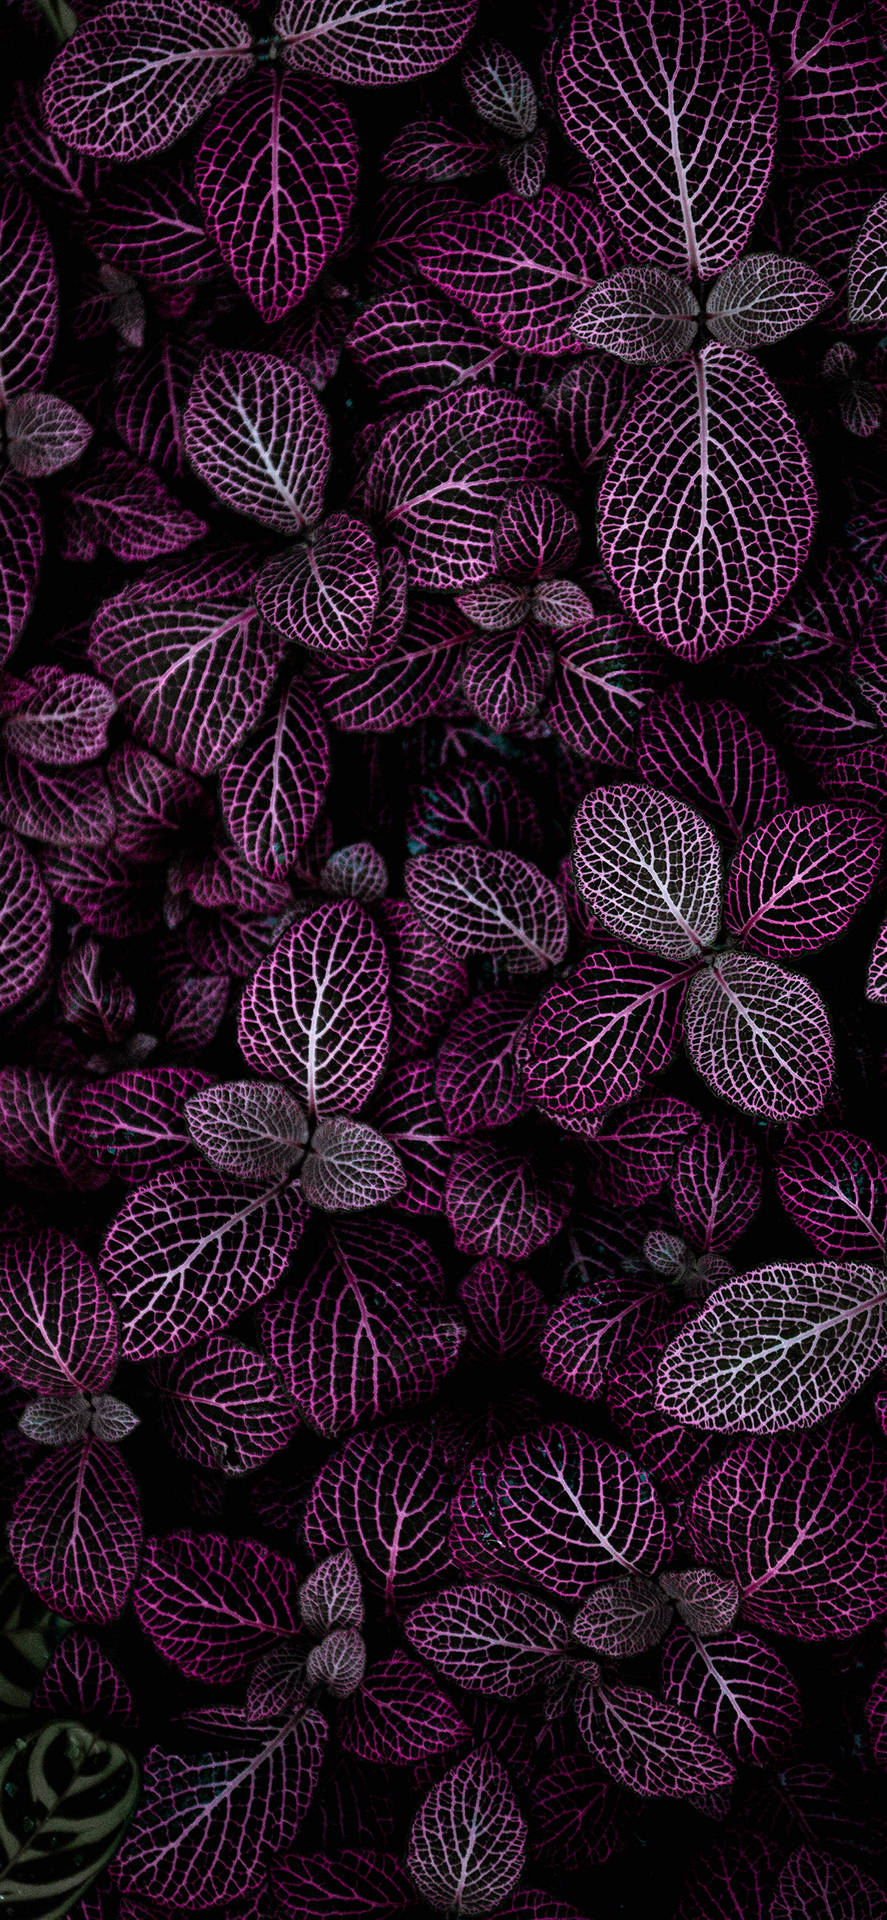 Get connected to nature with Plants Iphone Wallpaper